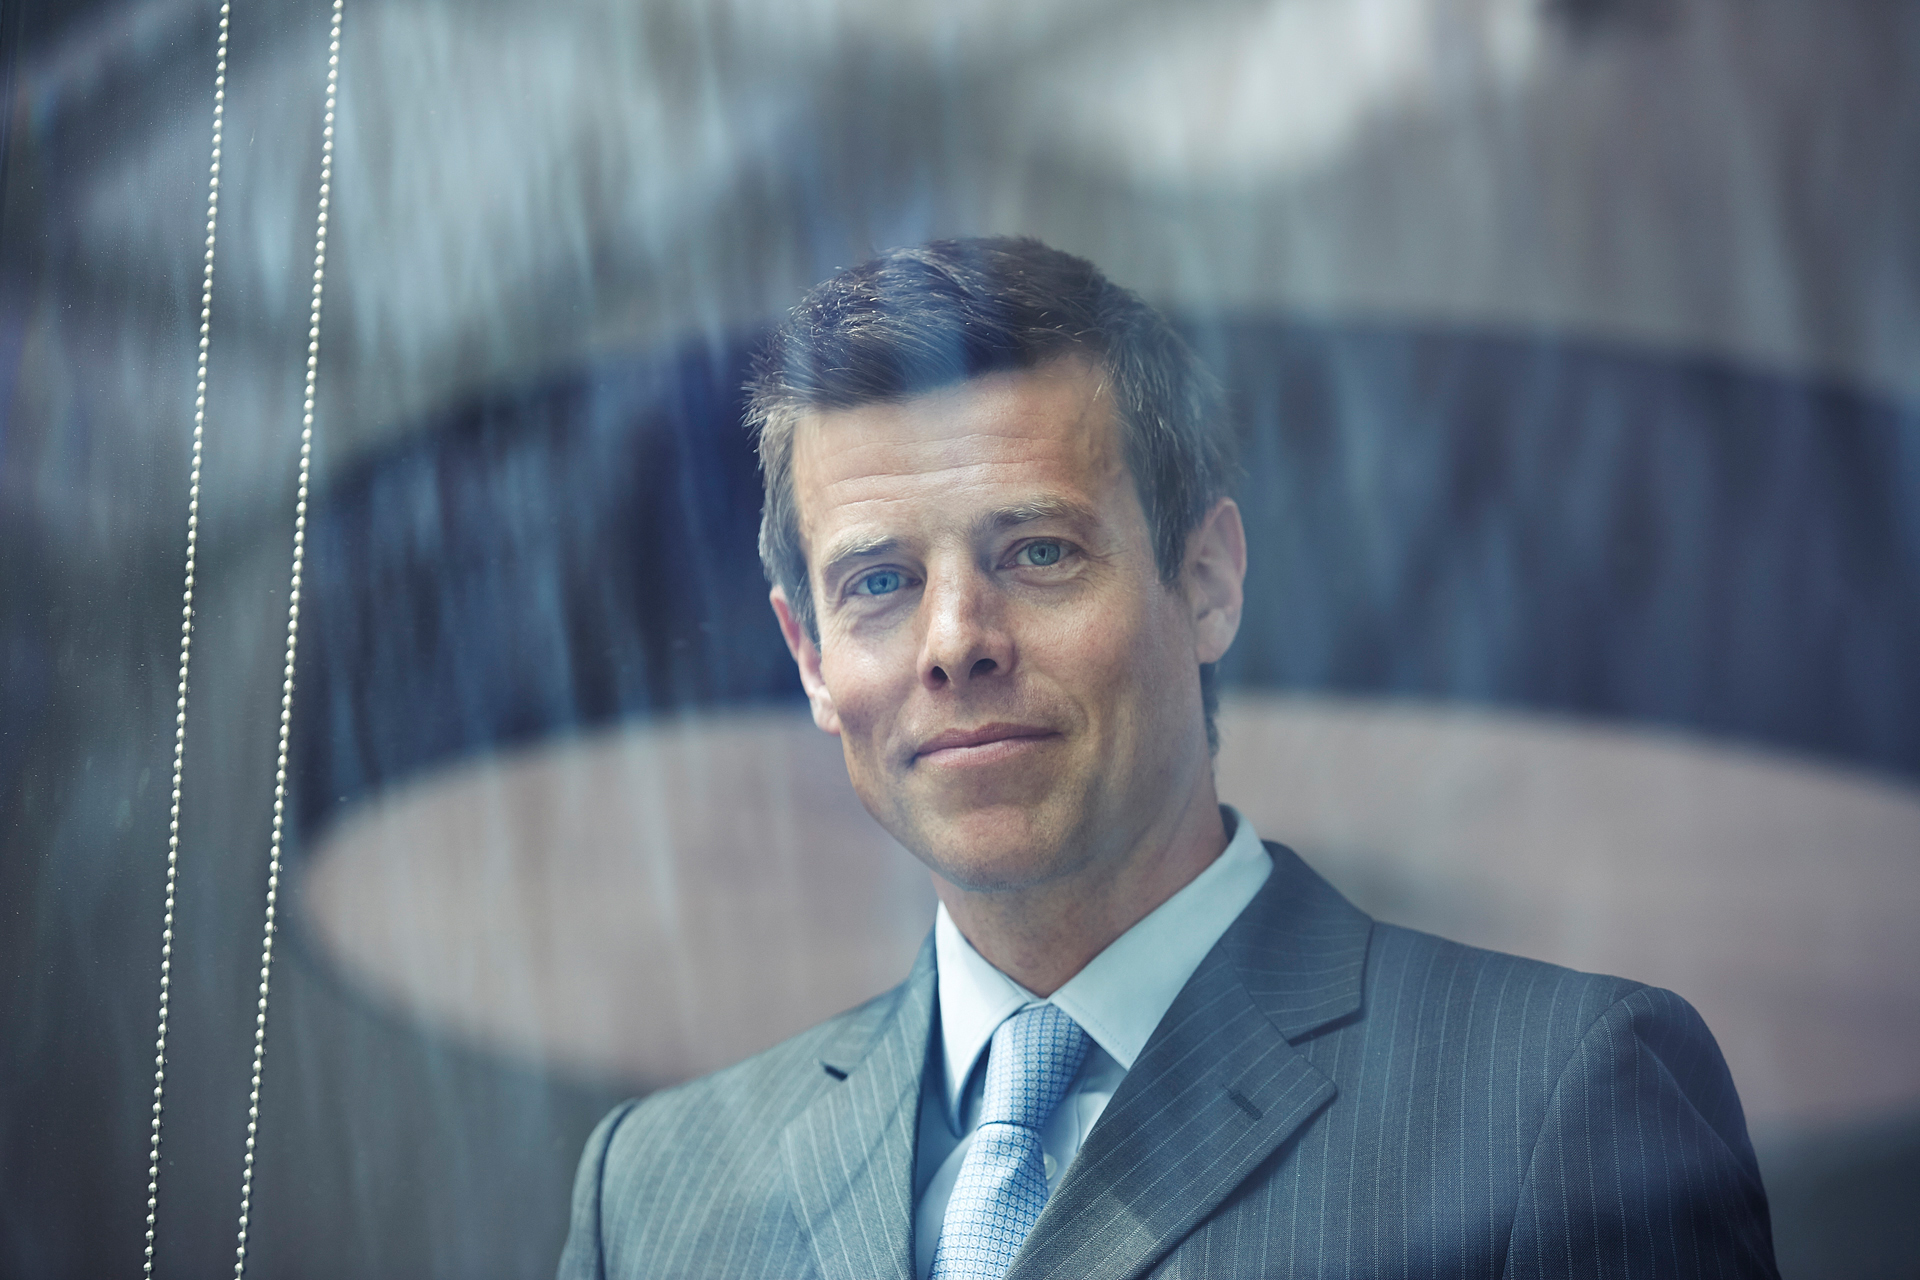 corporate photography portrait of business man smiling looking at camera